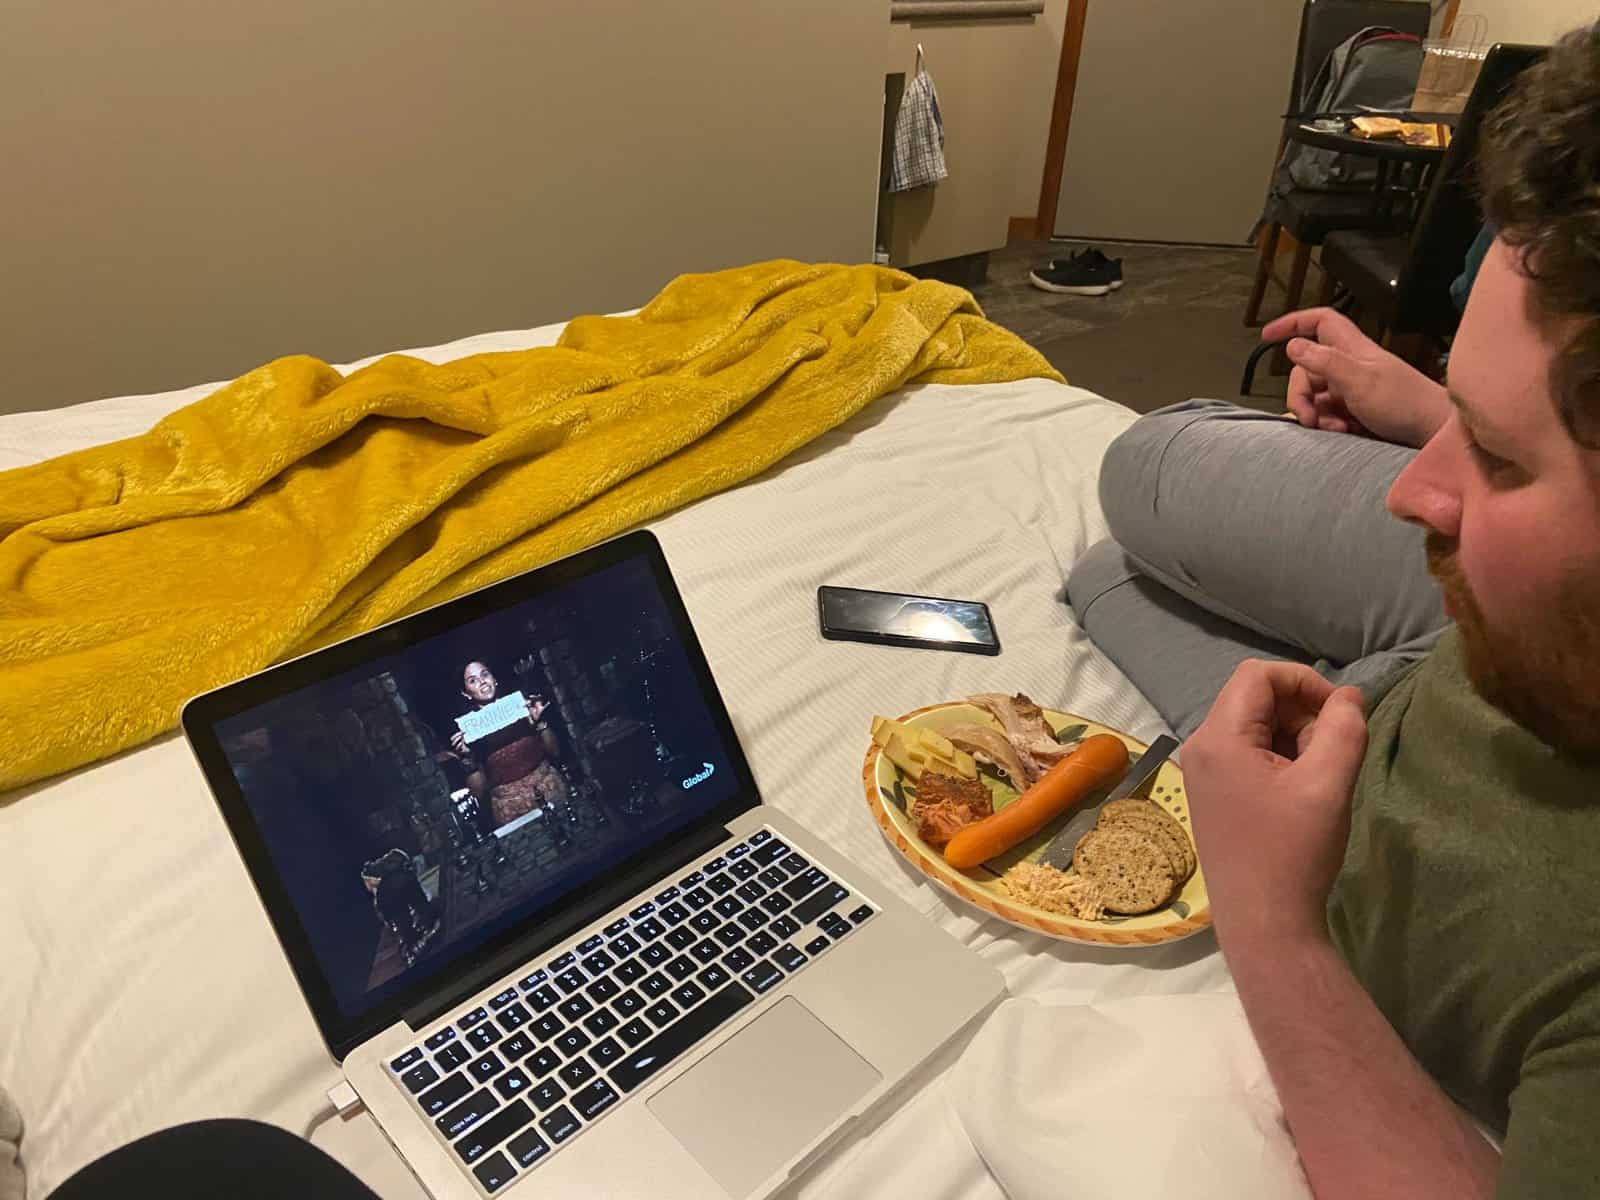 Watching Survivor and eating dinner in bed at Aoraki Mount Cook hotel in New Zealand